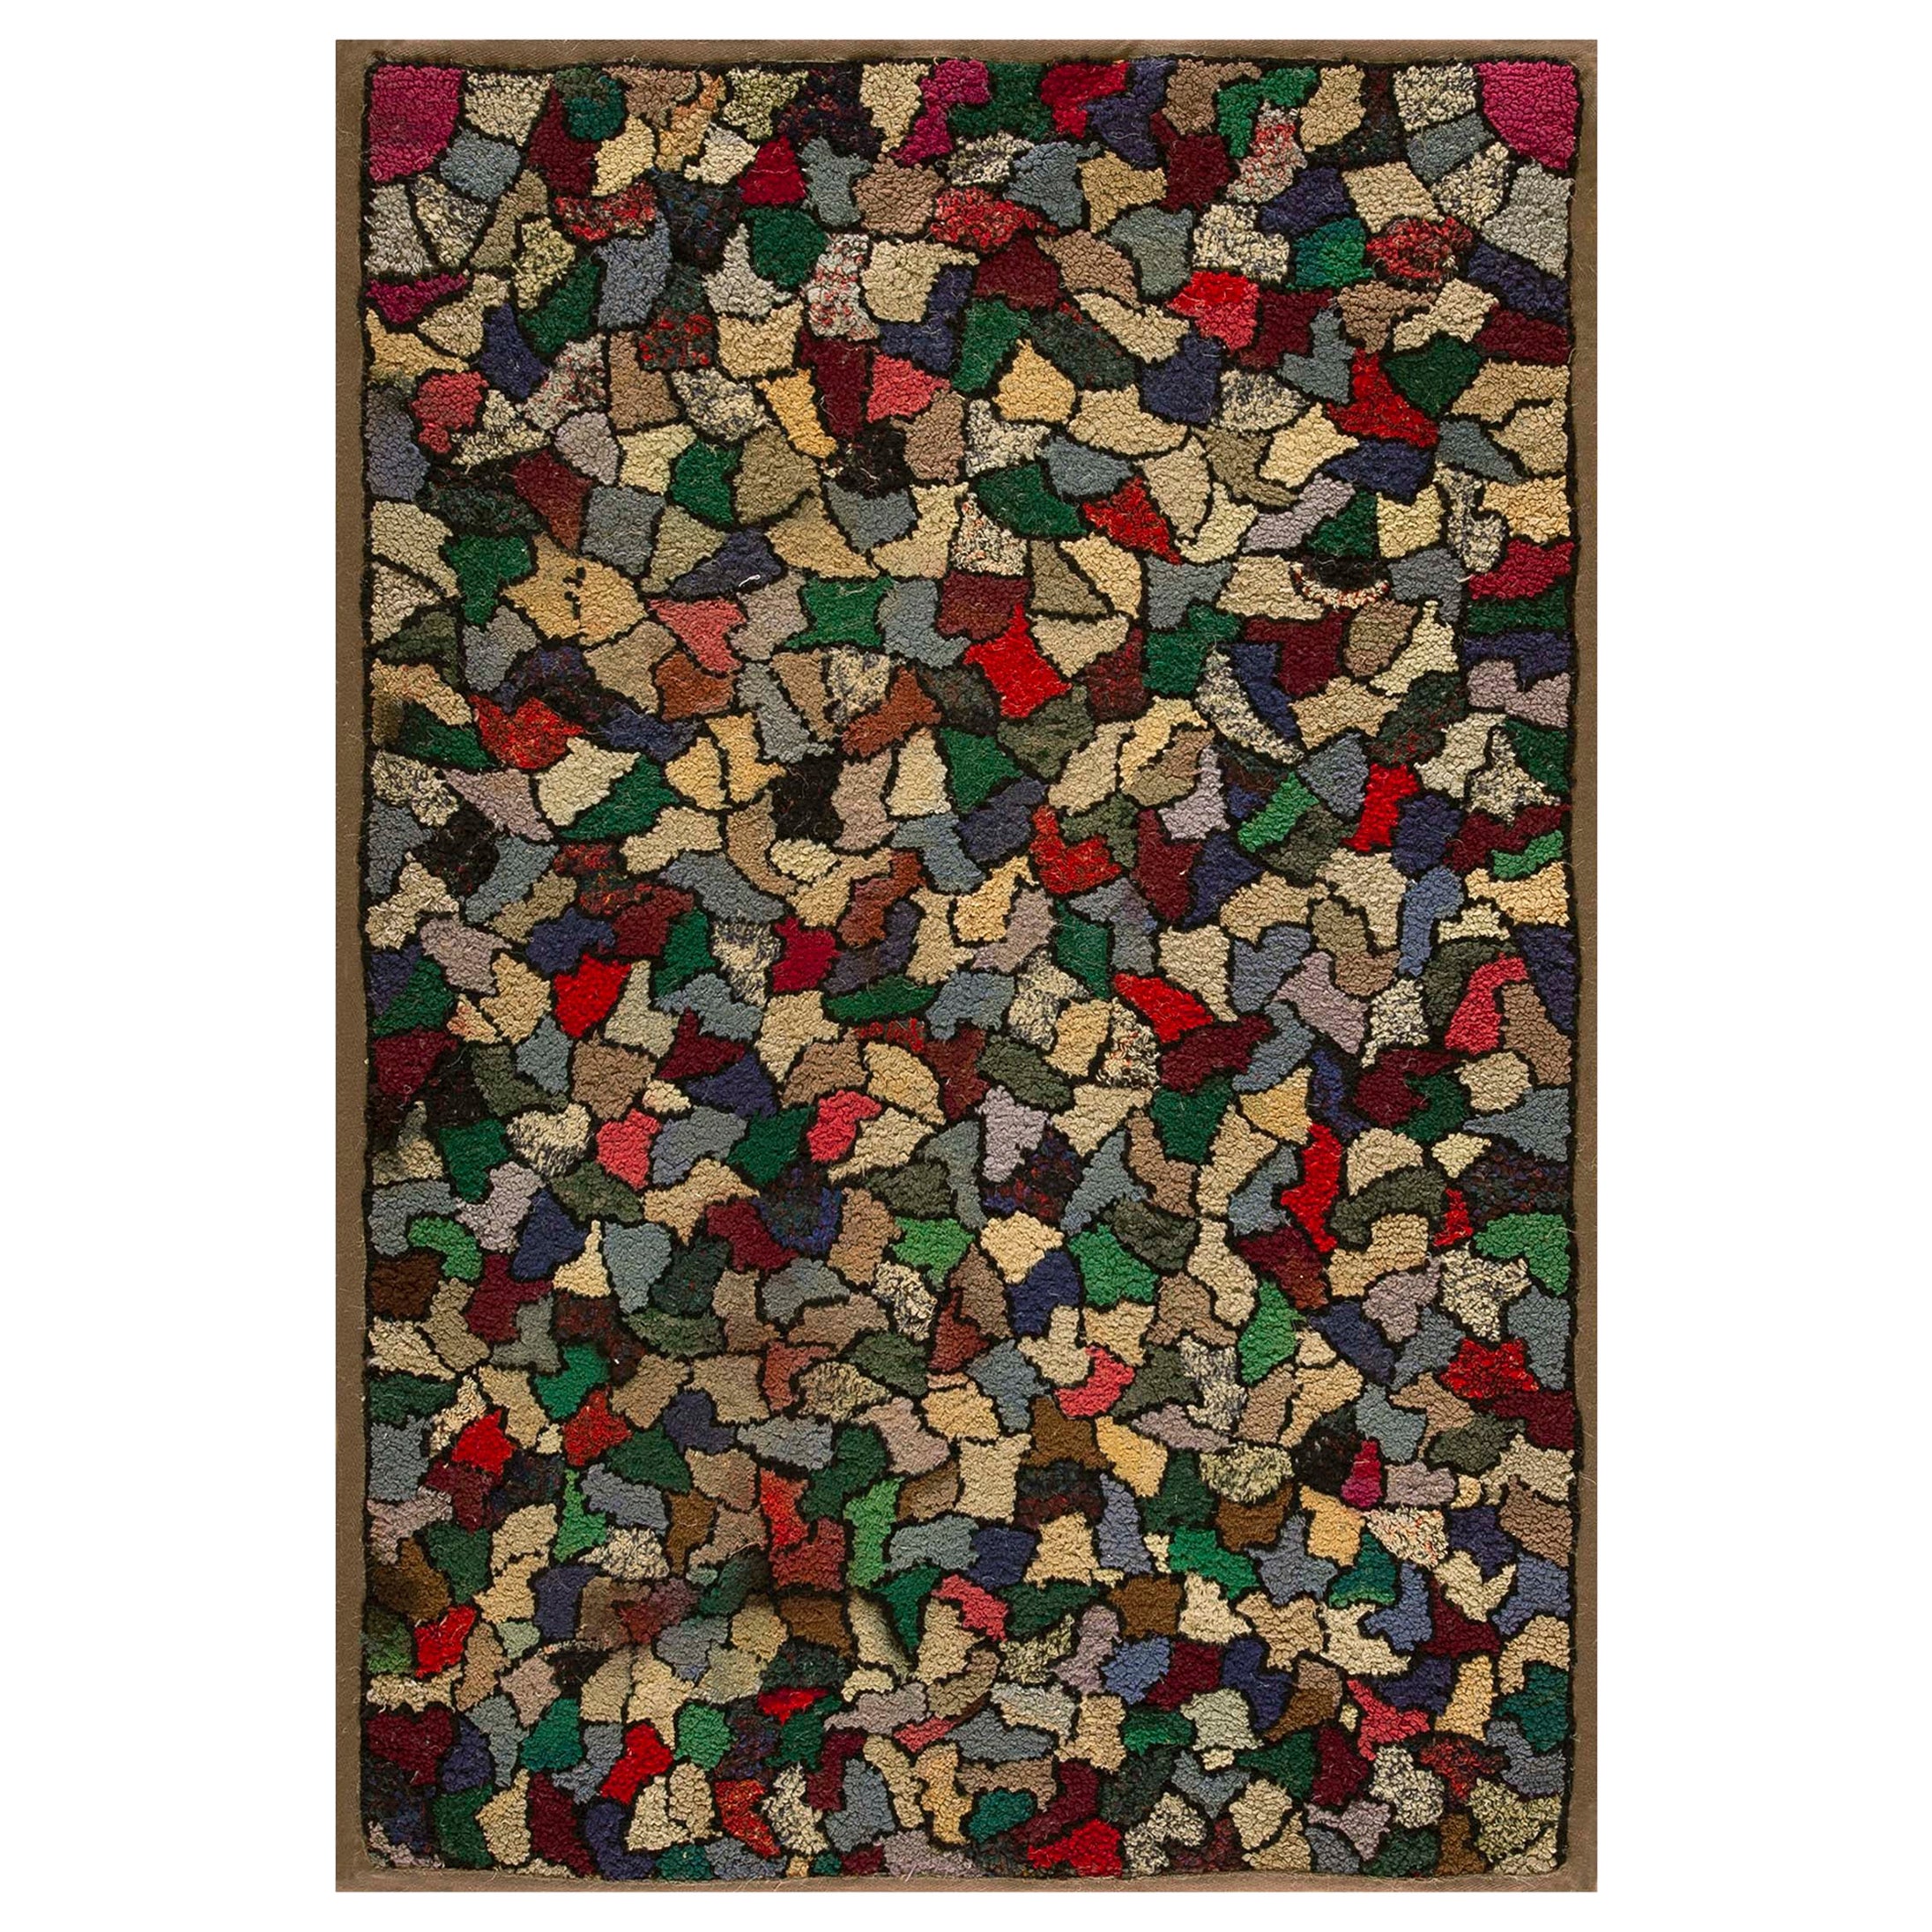 1930s American Hooked Rug ( 2'6" x 3'6" ) For Sale